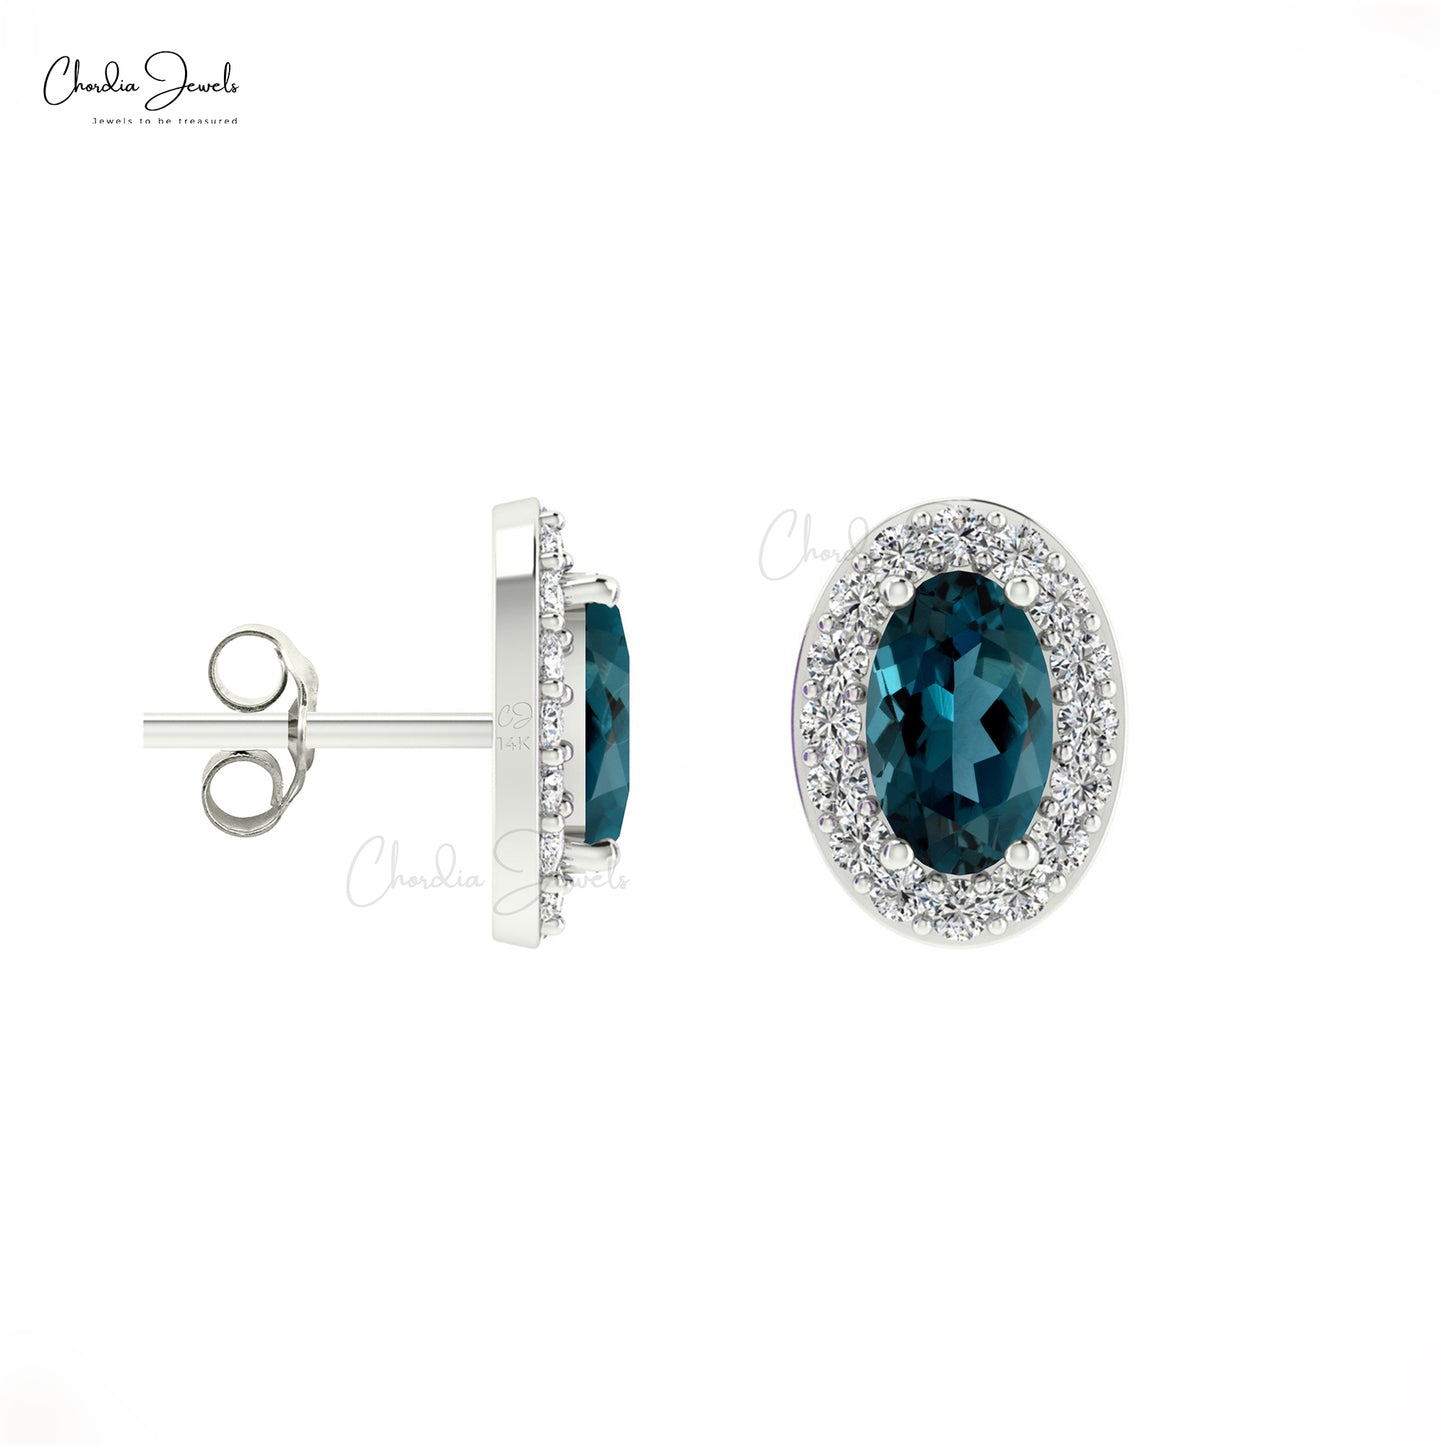 Load image into Gallery viewer, Solid 14k Gold Diamond Halo Earrings Authentic 5x3mm London Blue Topaz Studs For Wedding Gift
